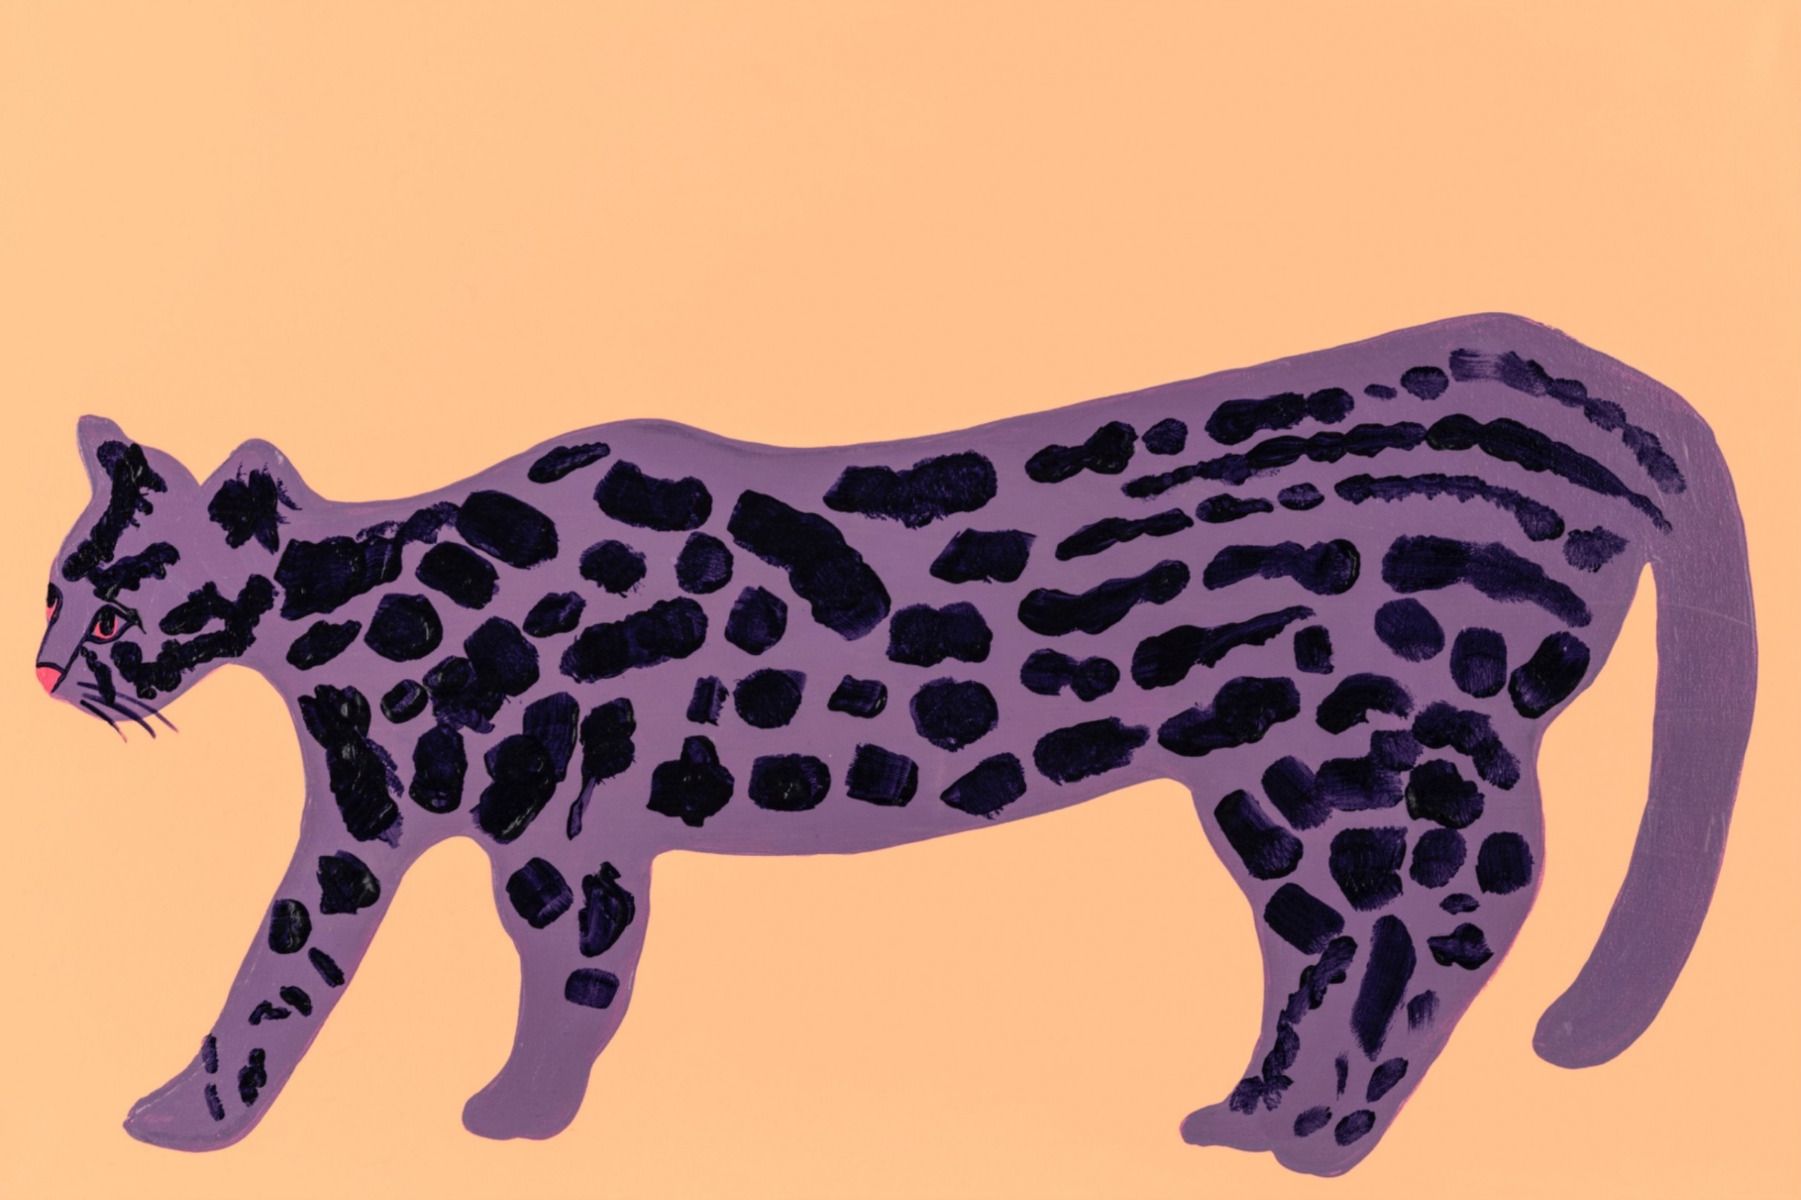 Long Wild Cat by Lucie Sheridan